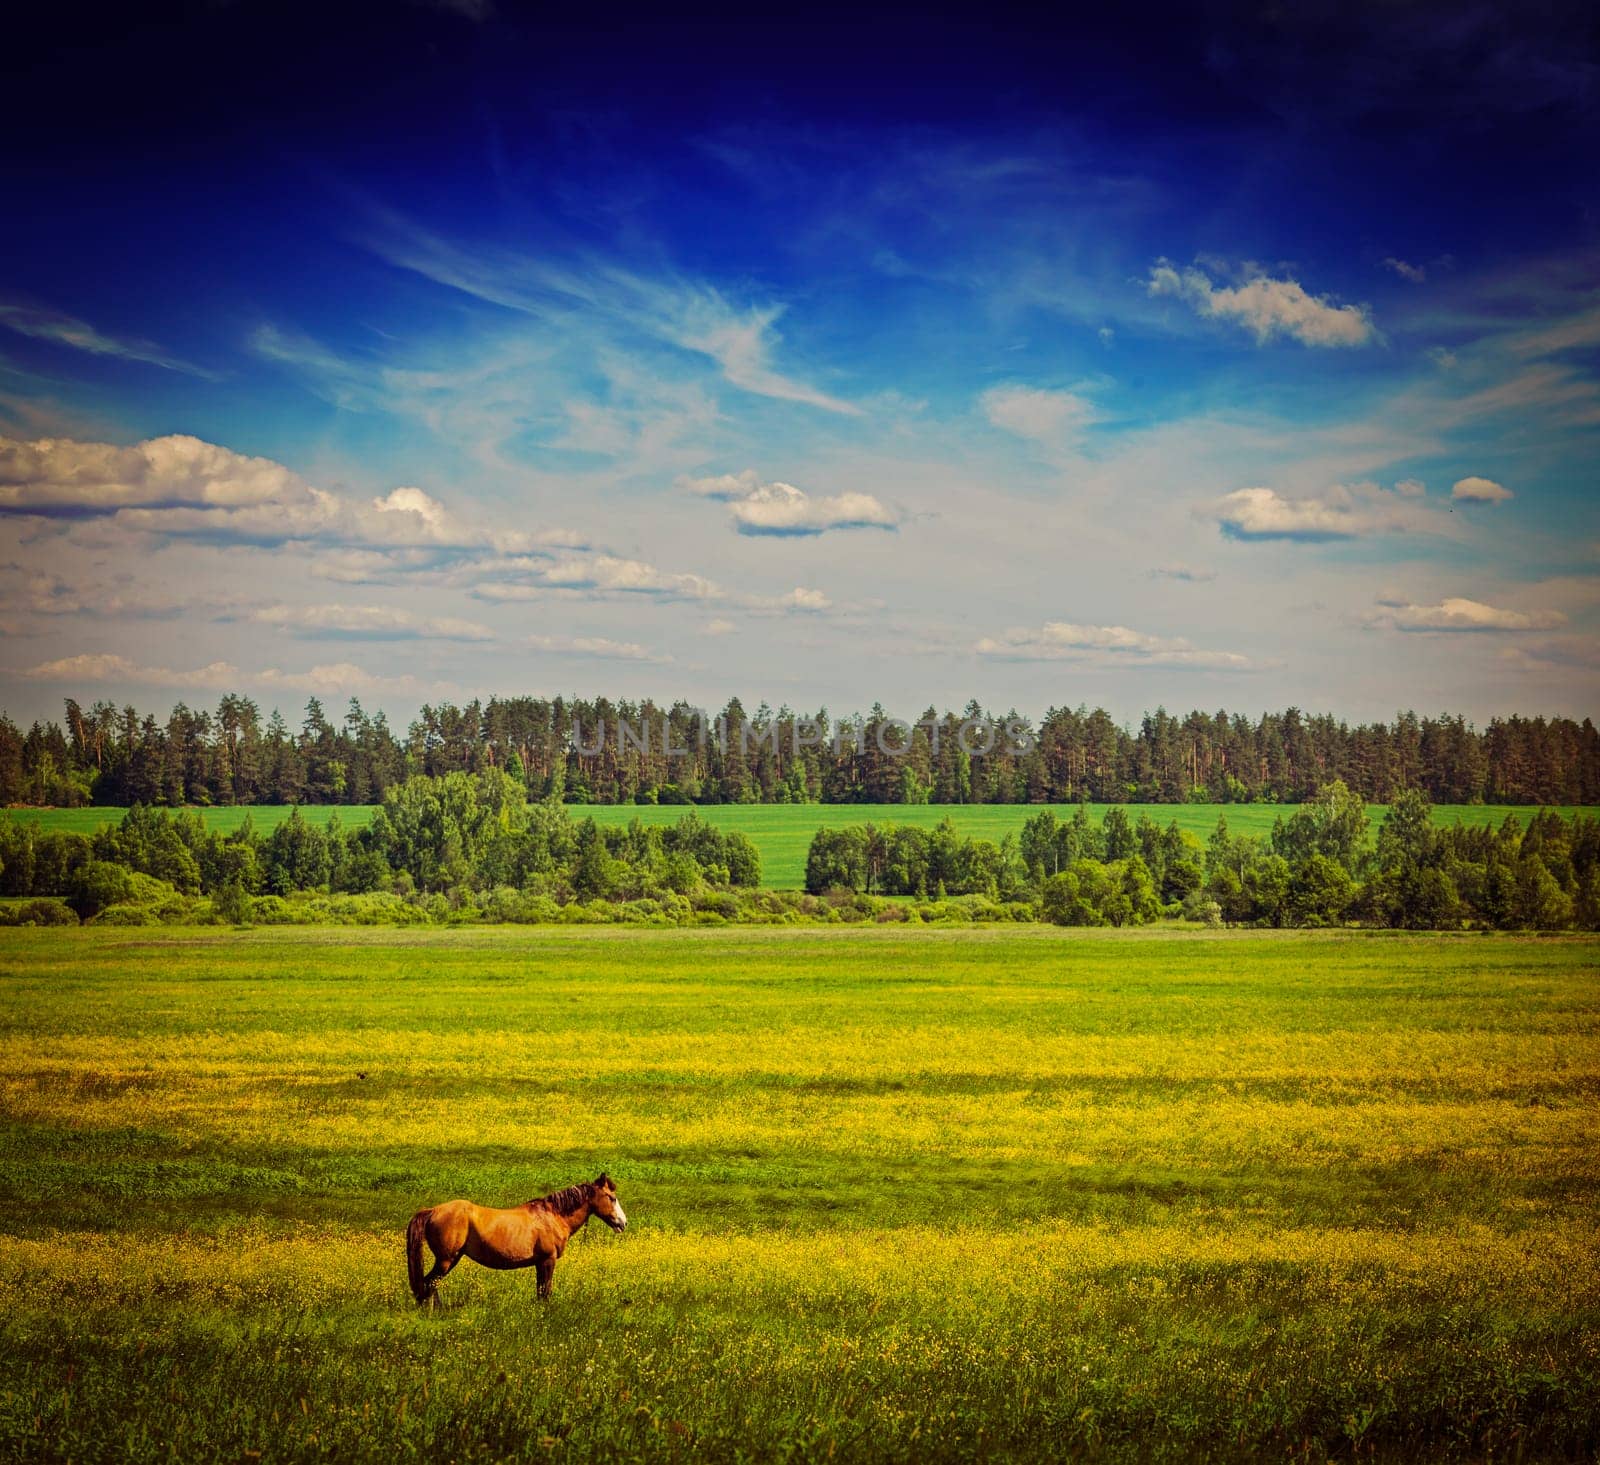 Vintage retro hipster style travel image of spring summer background - green grass field meadow scenery lanscape under blue sky with grazing horse